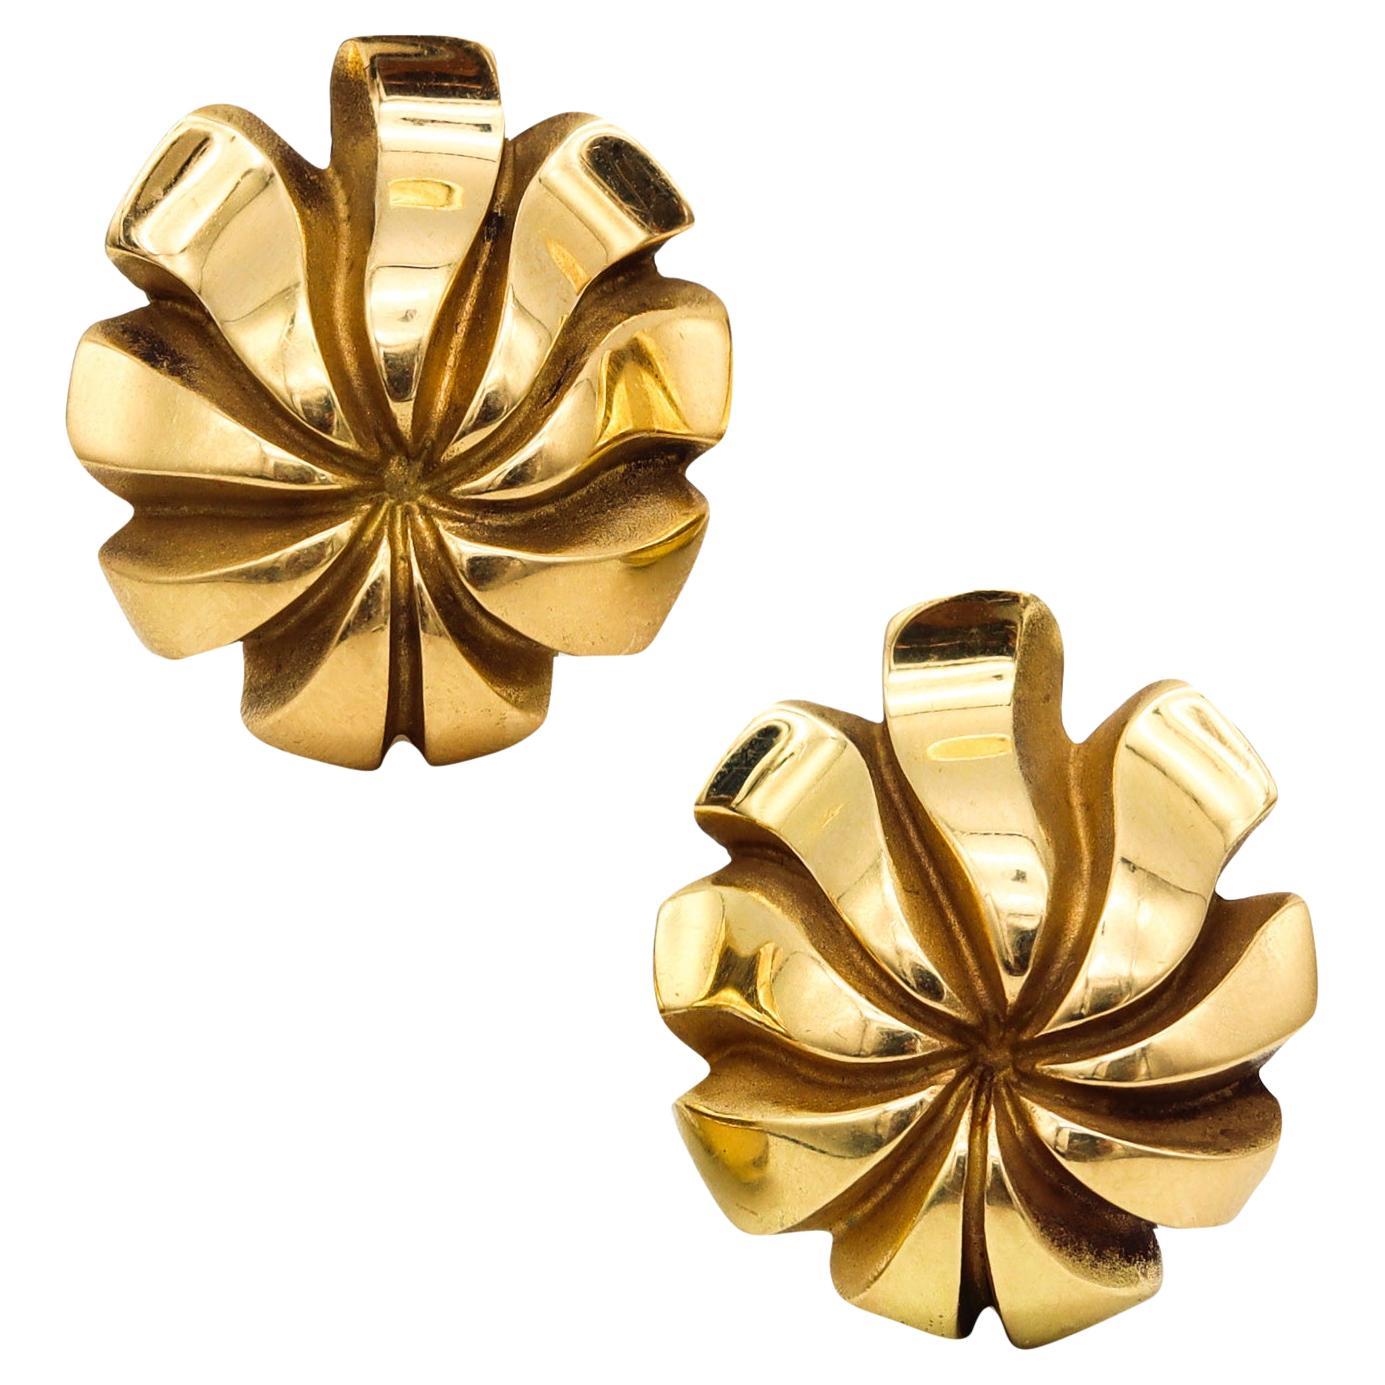 Tiffany Co. 1970 Japonisme Sculptural Chrysanthemum Clip Earrings in 18Kt Gold